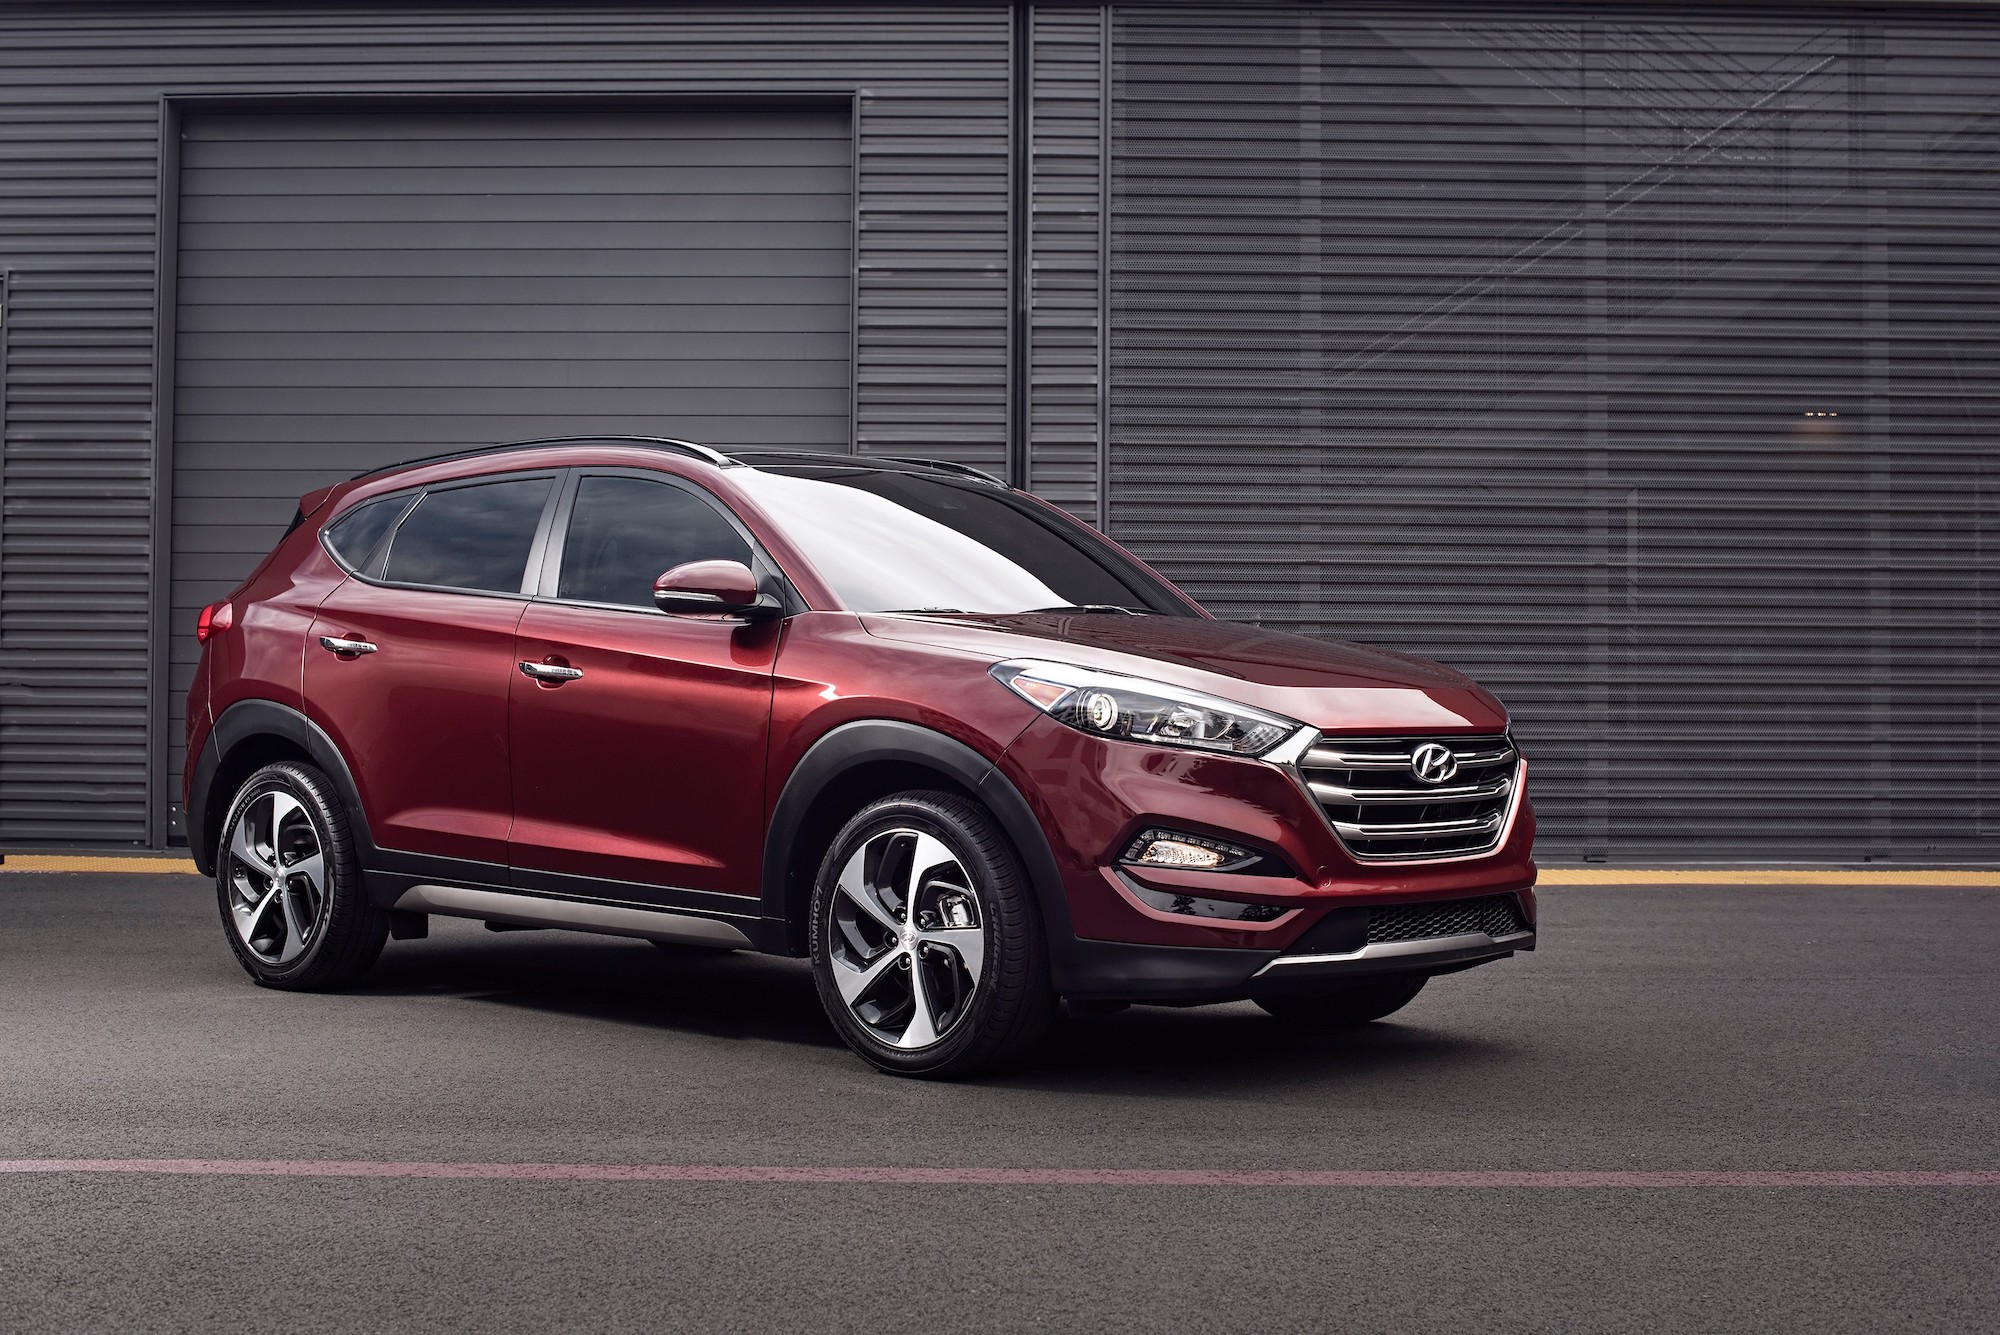 A dark-red 2016 Hyundai Tucson parked on pavement in front of a dark-gray building